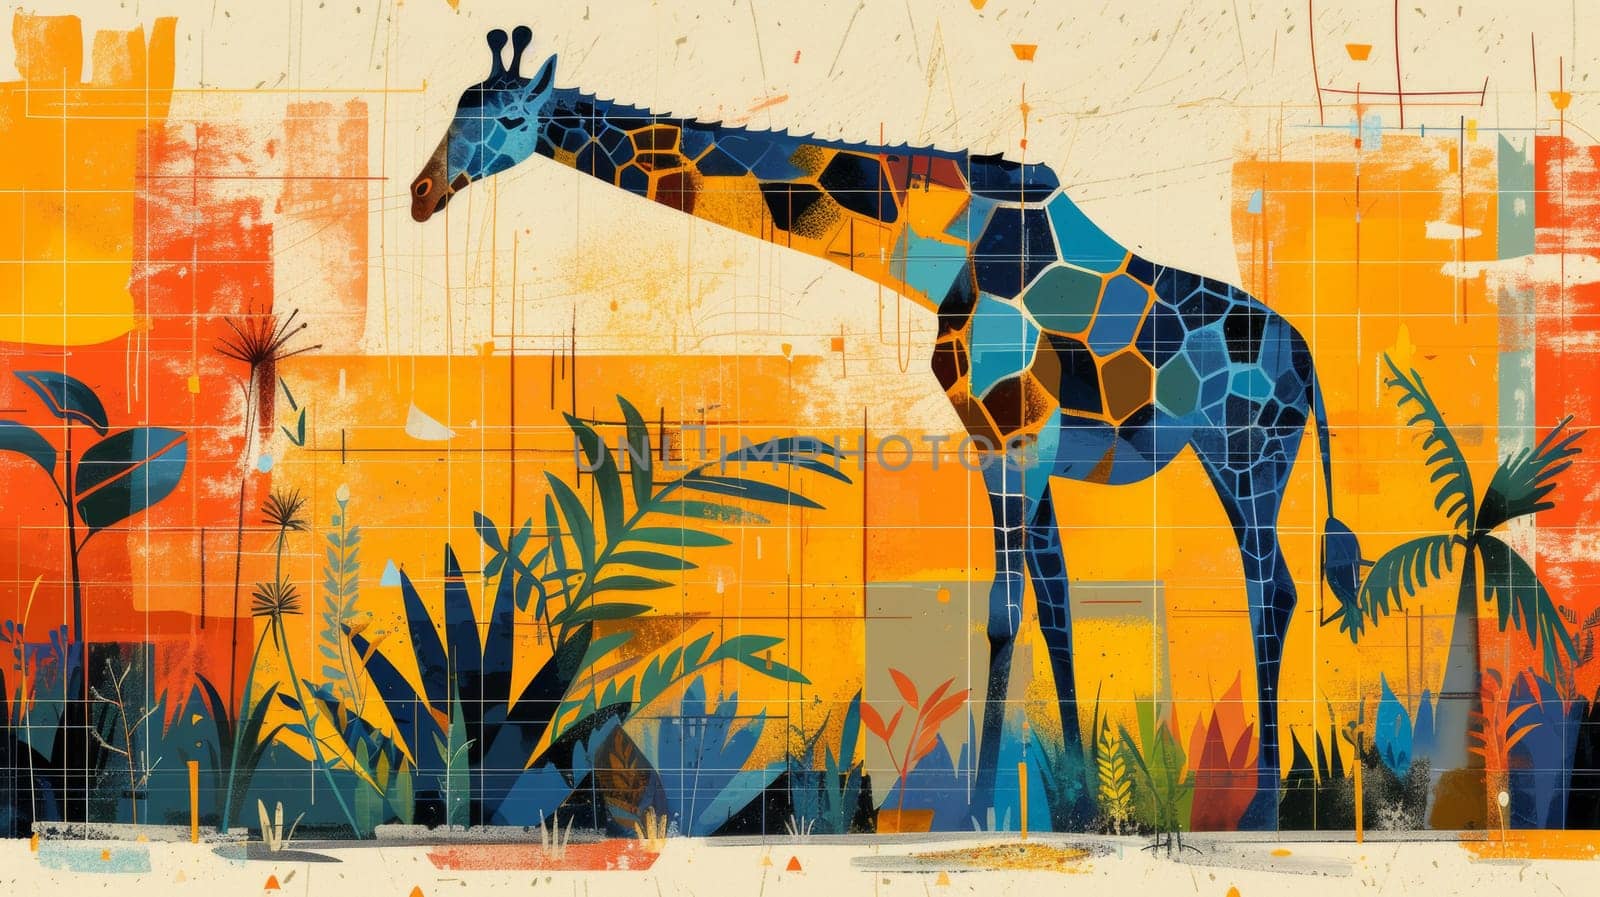 A painting of a giraffe standing in front of some plants